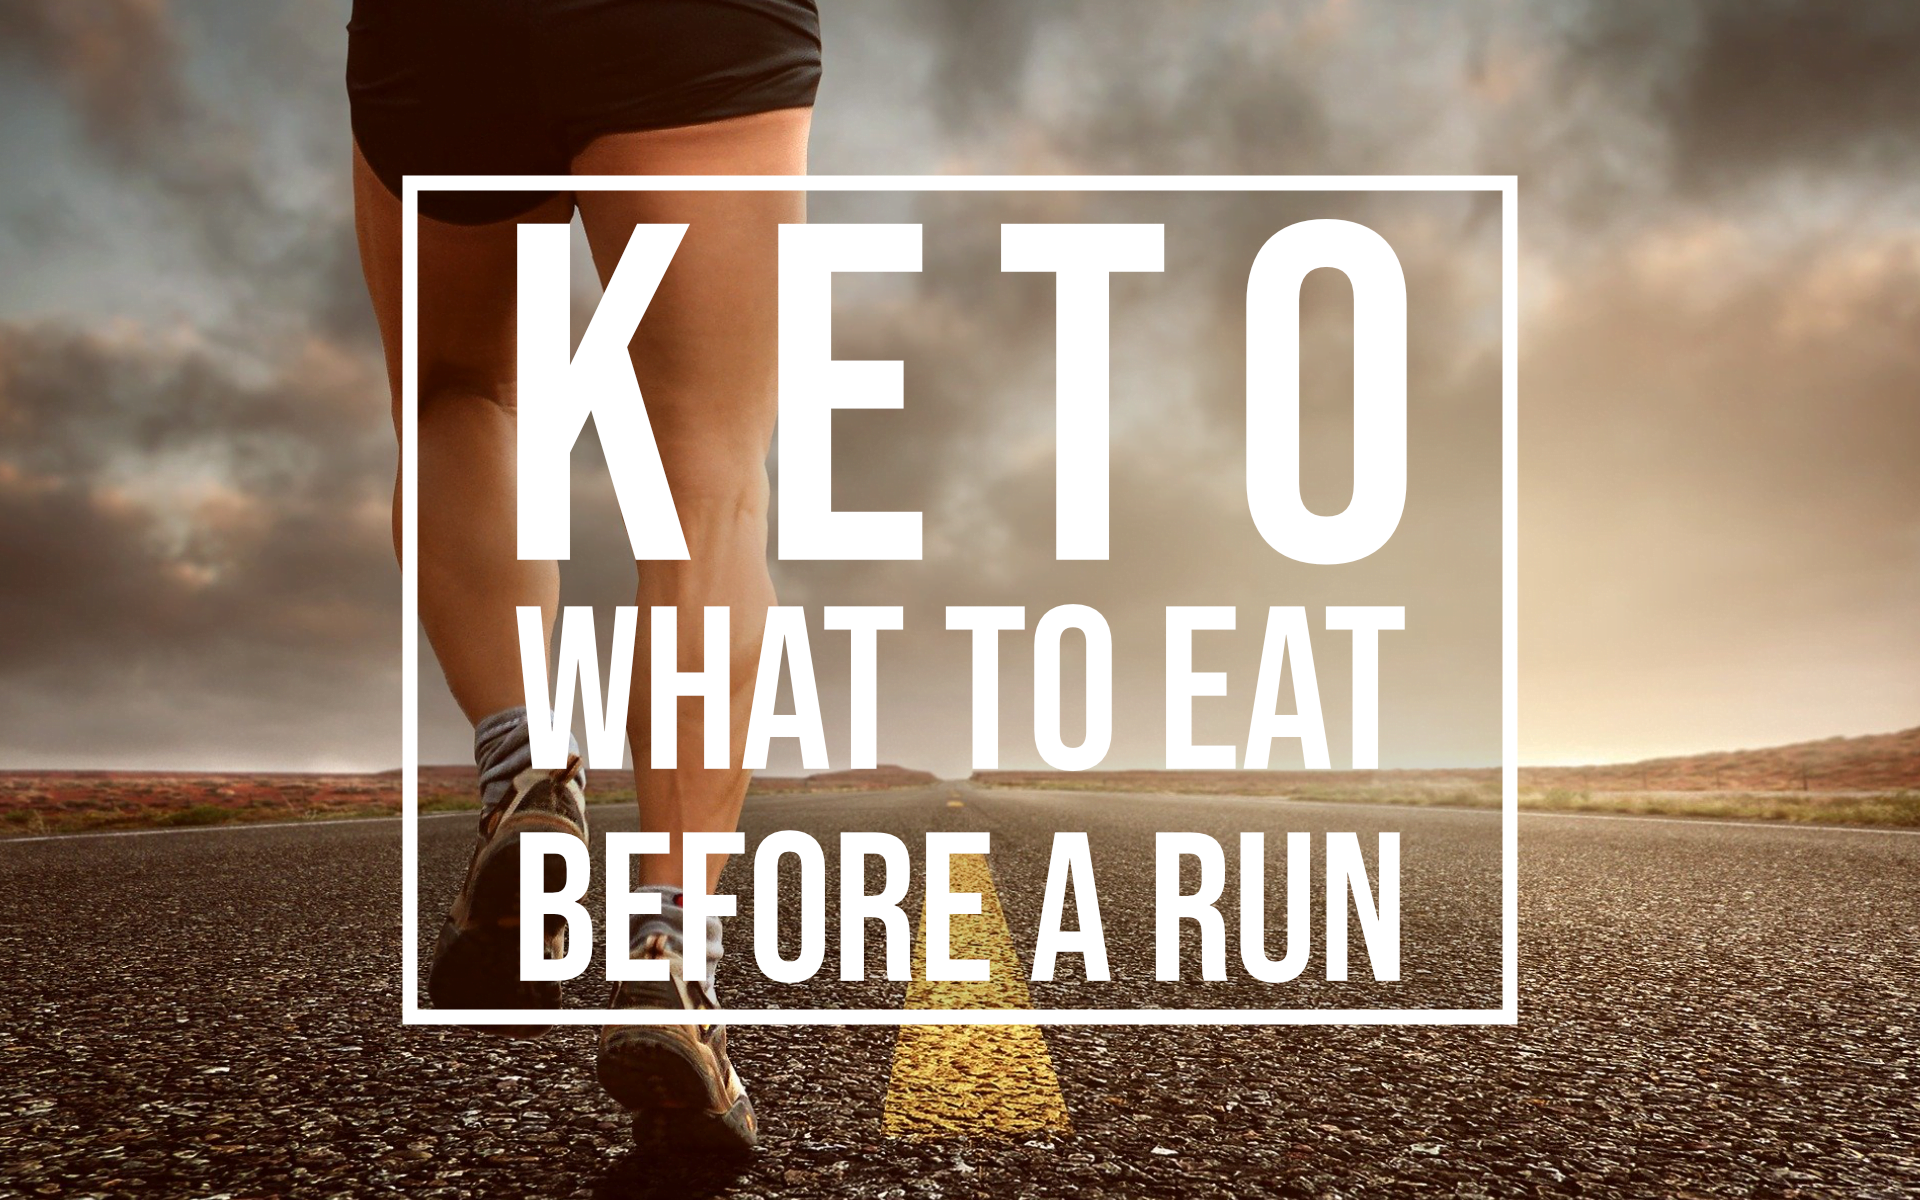 what to eat before a run on keto